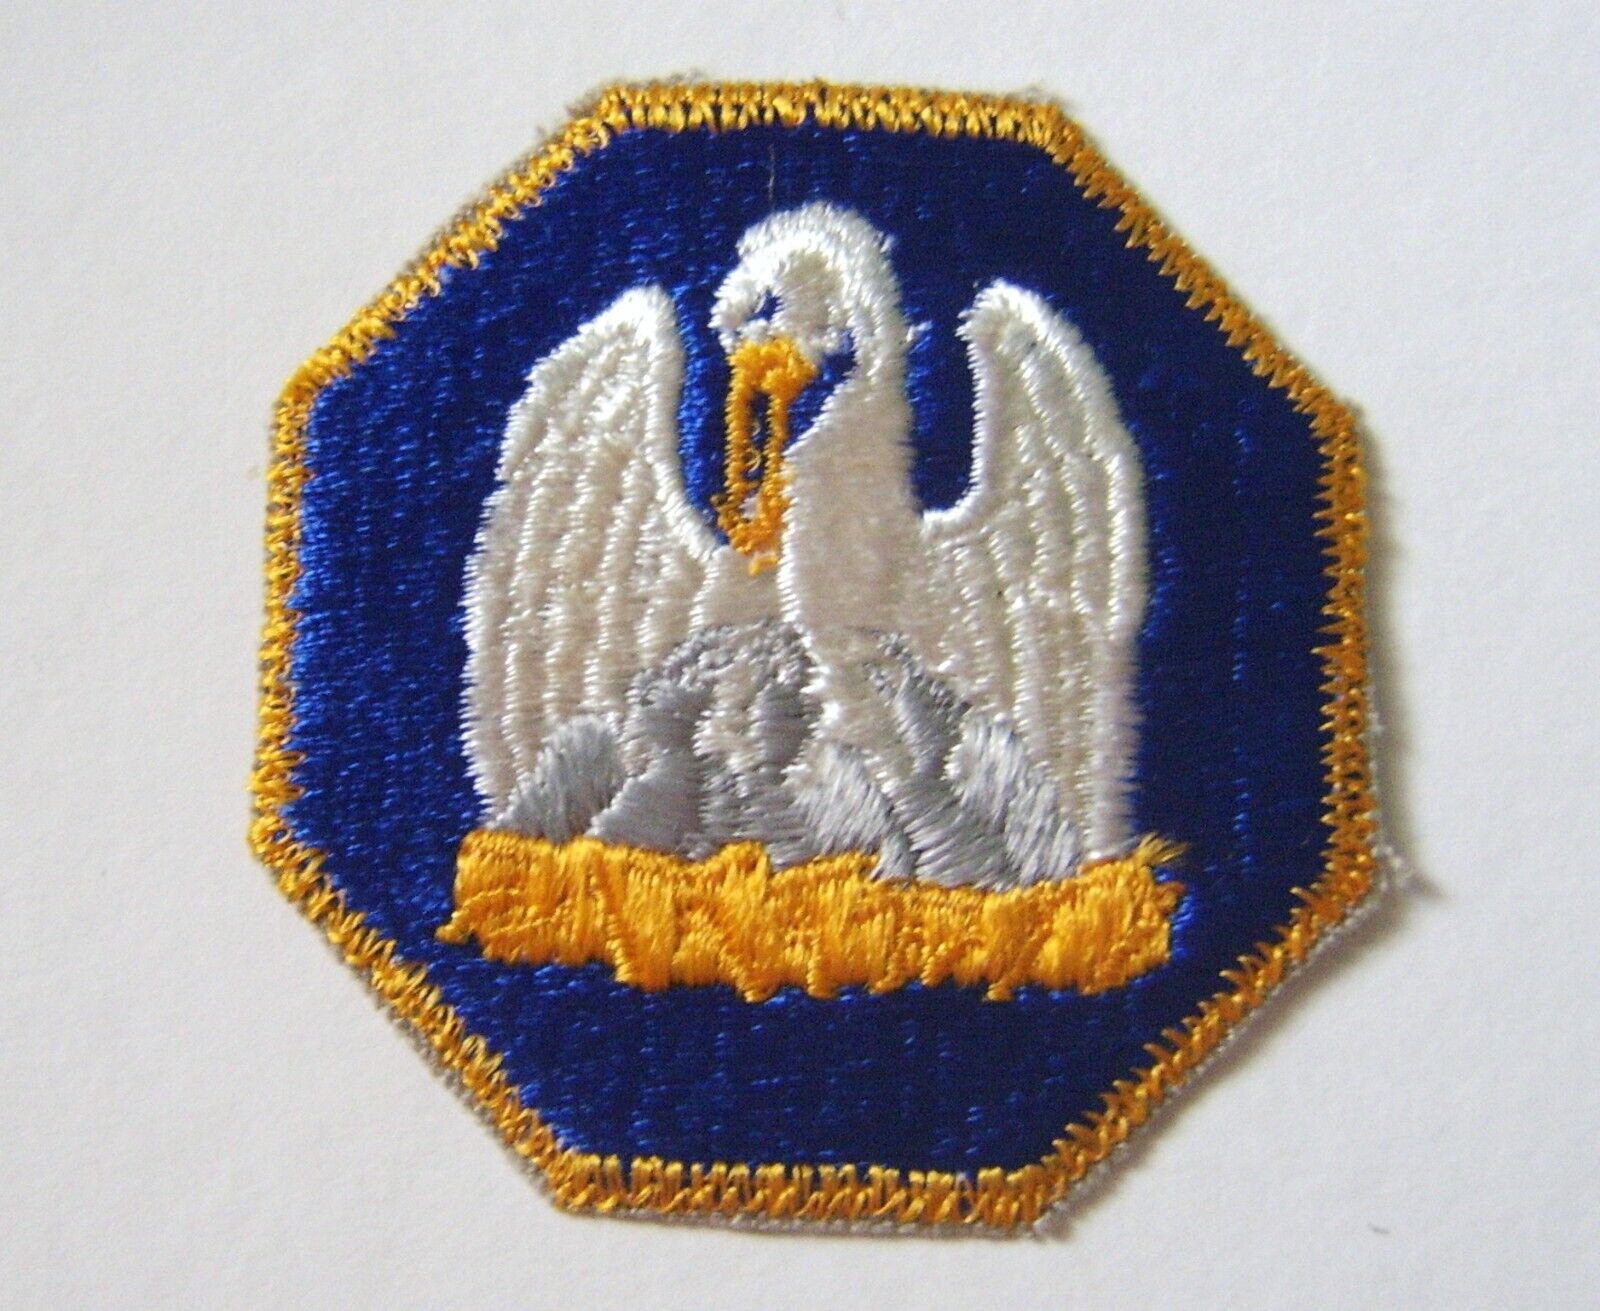 LOUISIANA NATIONAL GUARD PATCH SSI U.S. ARMY - FULL COLOR